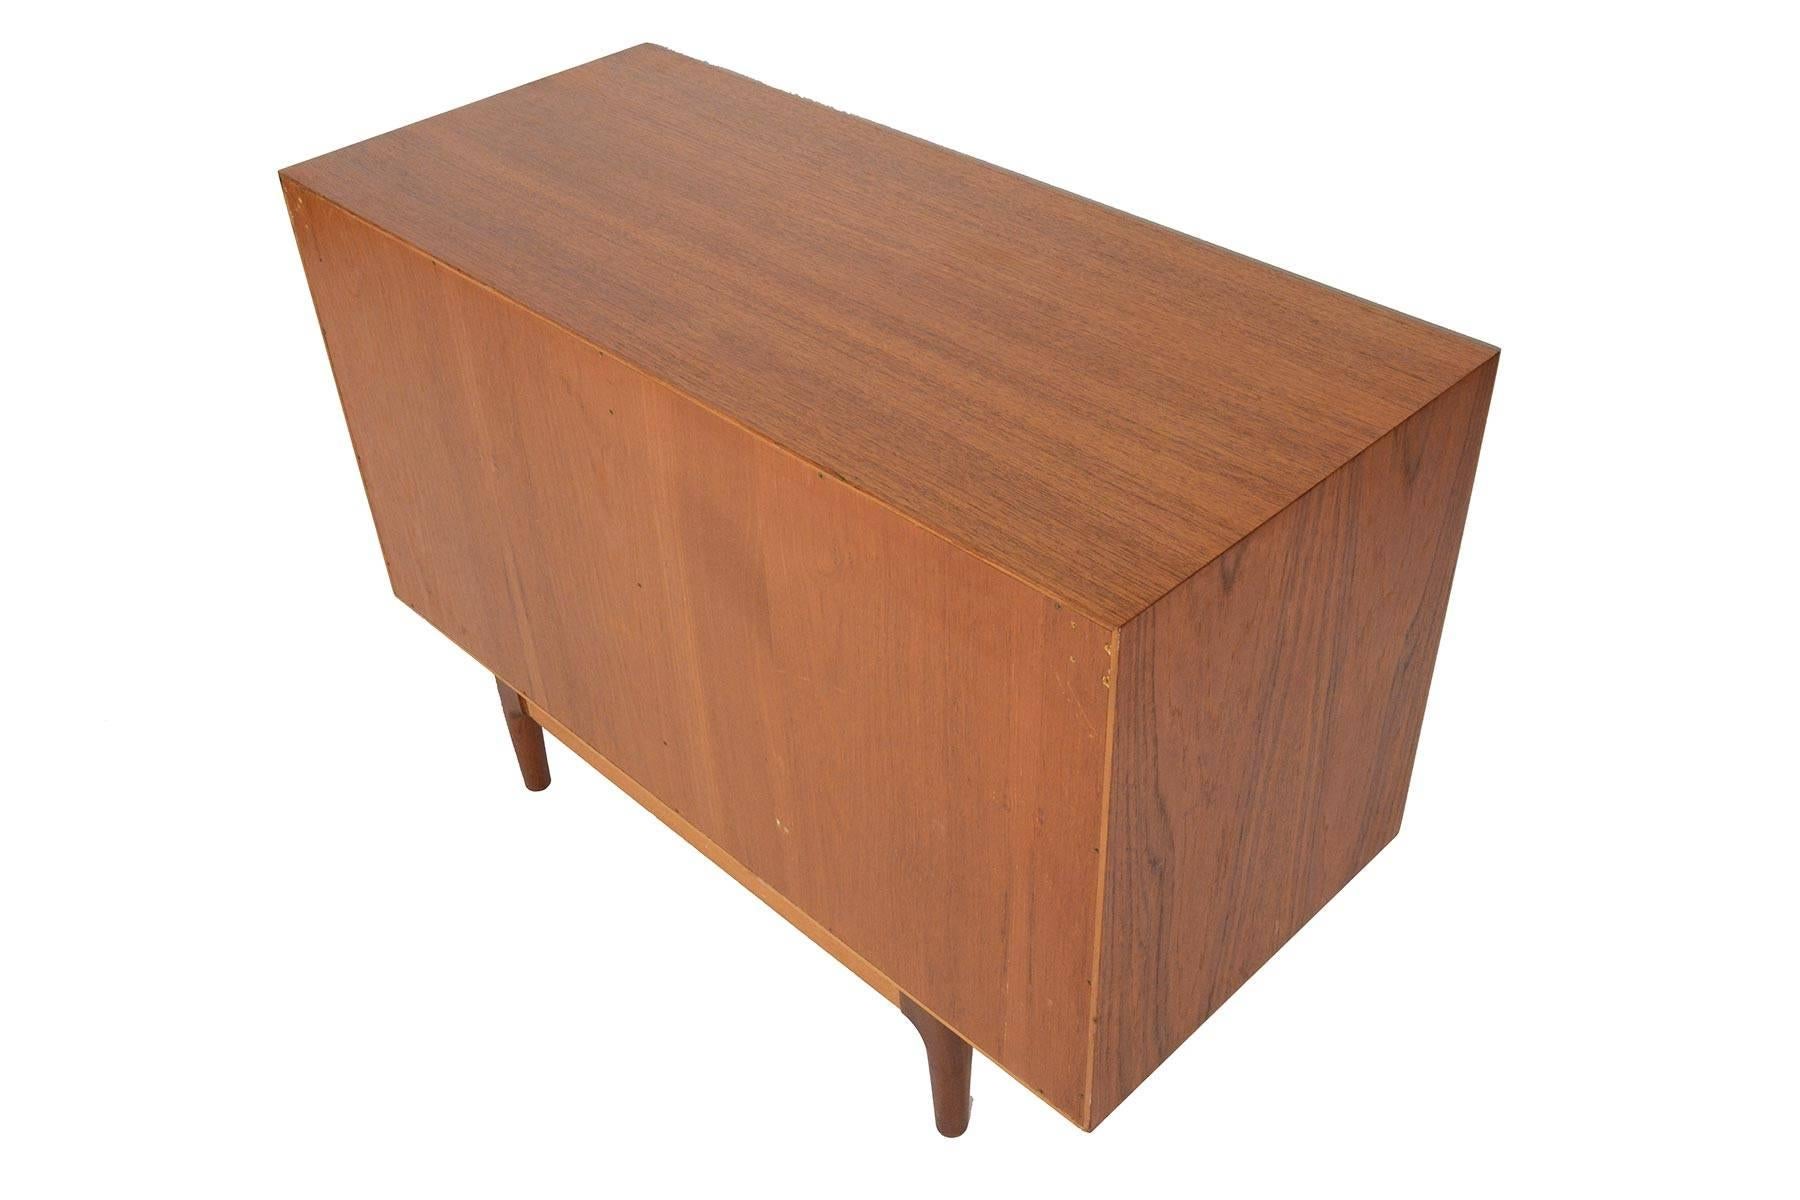 Small Refinished Teak Credenza by Ib Kofod-Larsen for G-Plan #4 2